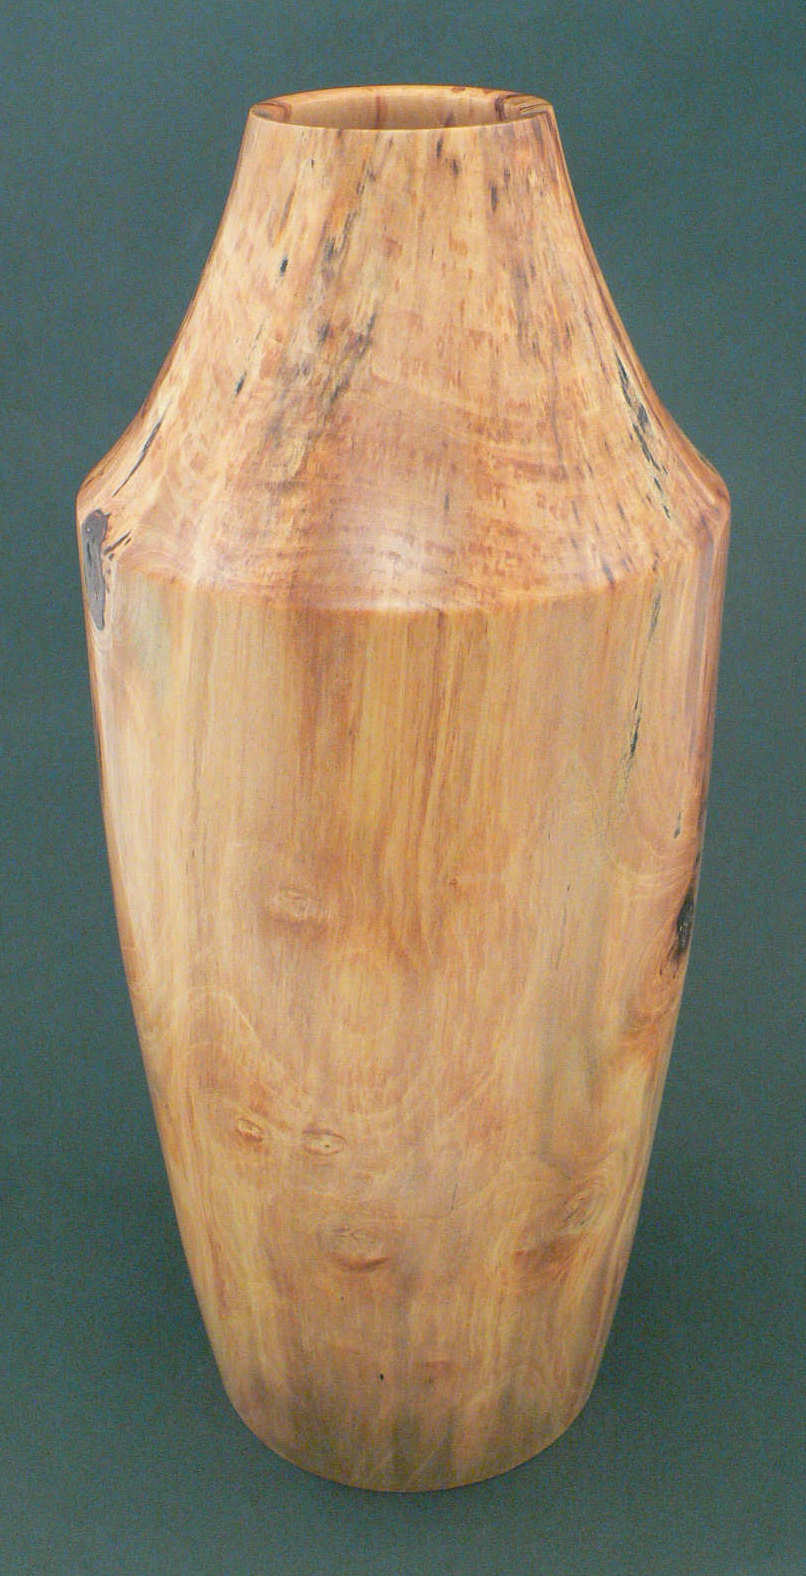 Wood art by Chris Rymer of Inside Out Wood Art made from - Poplar